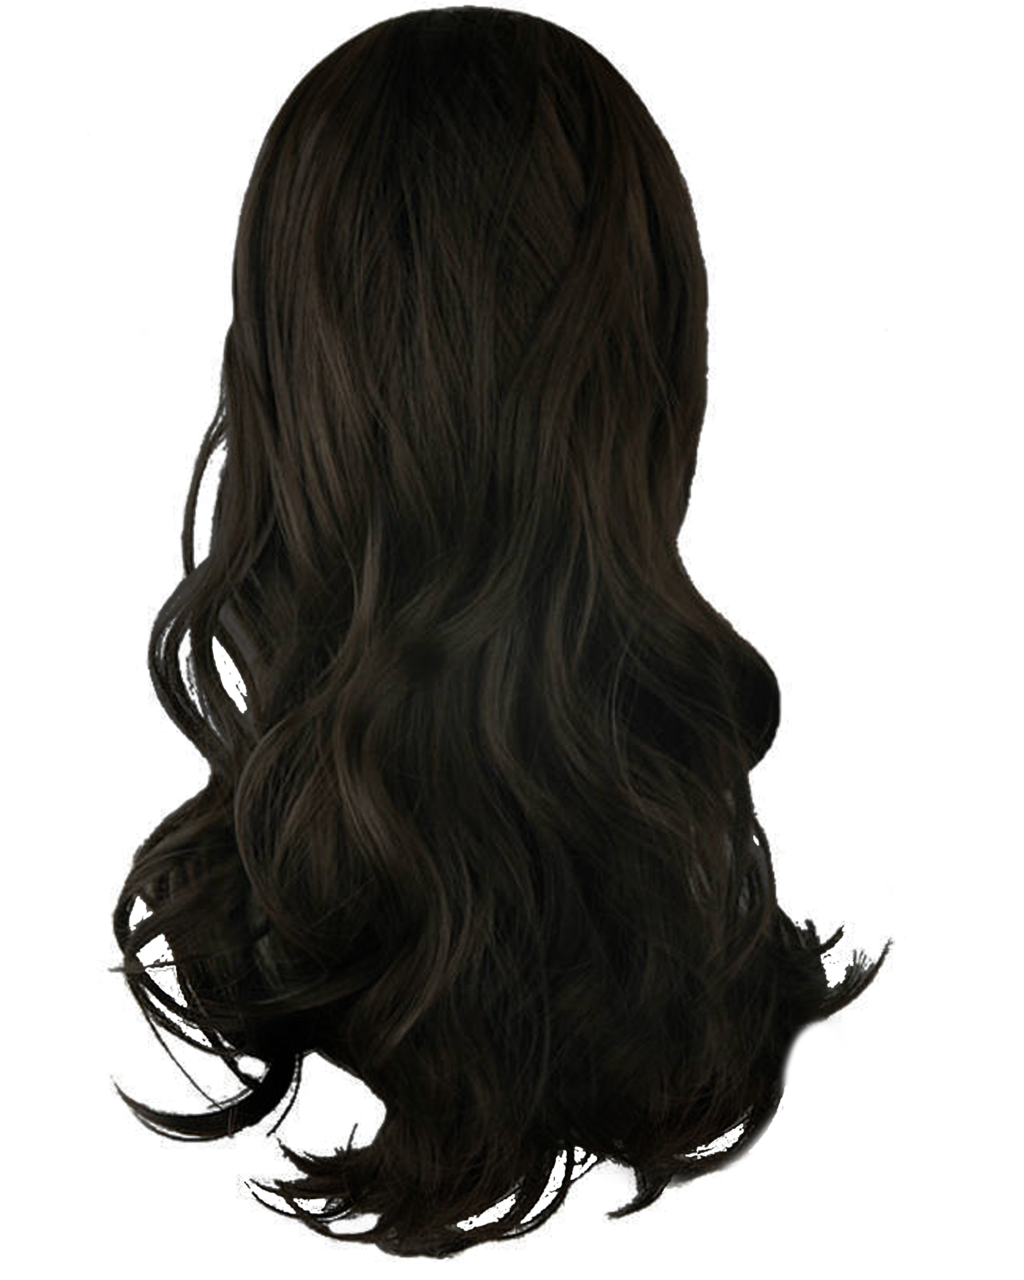 Black Curly Hair PNG Image